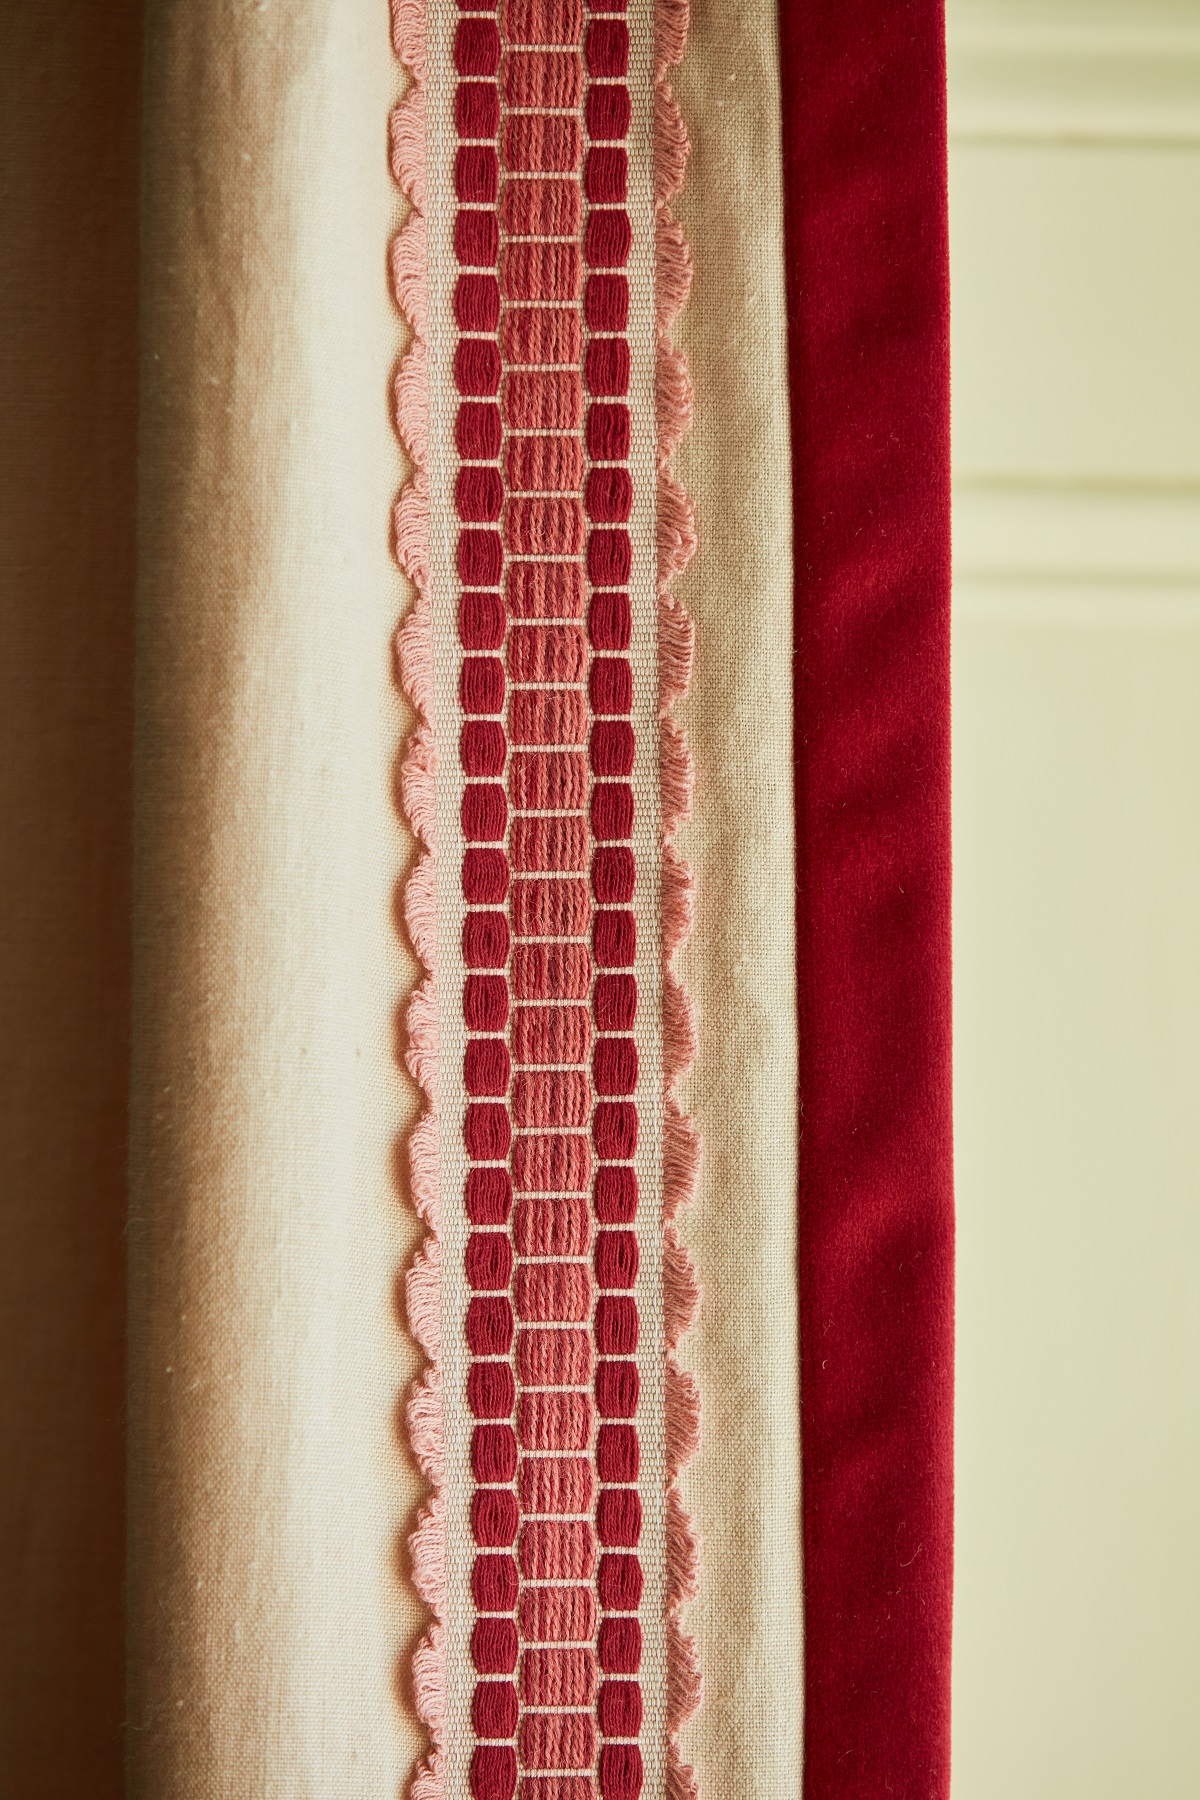 cream curtain trimmed in sanderson trimming range in shades of pinks and reds